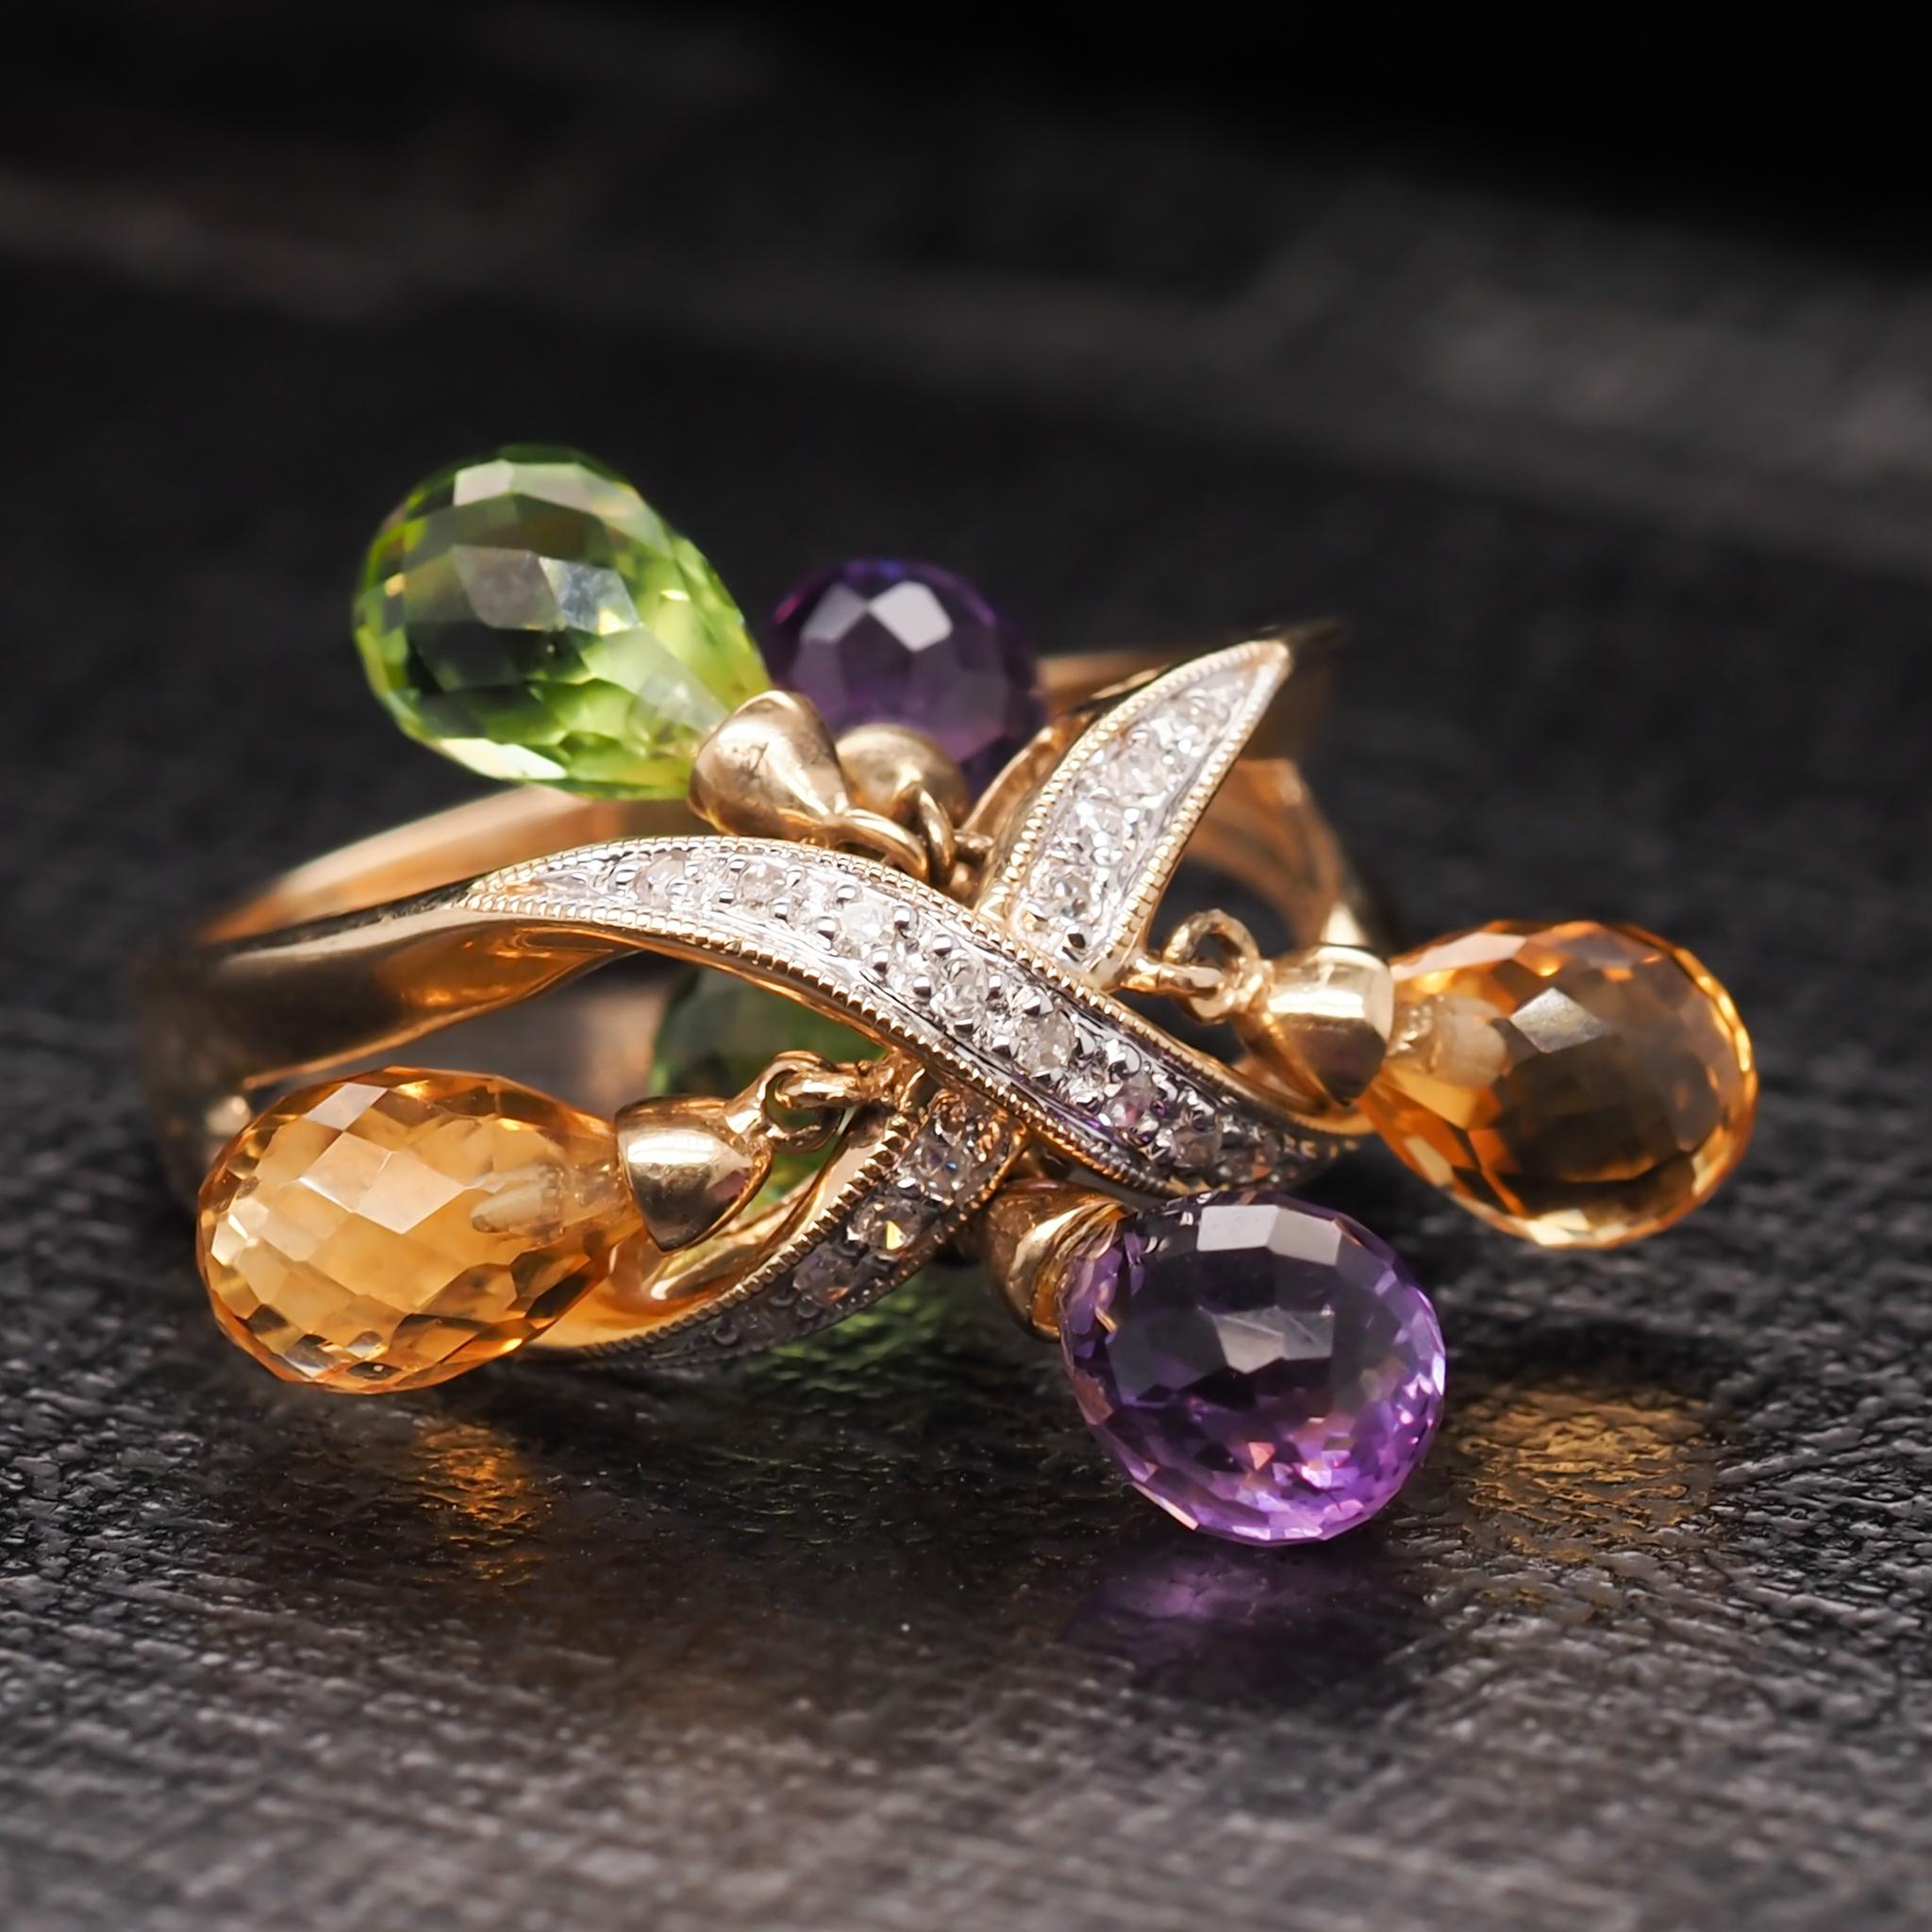 14 Karat Yellow Gold Diamond and Dangling Citrine, Amethyst and Peridot Ring For Sale 1